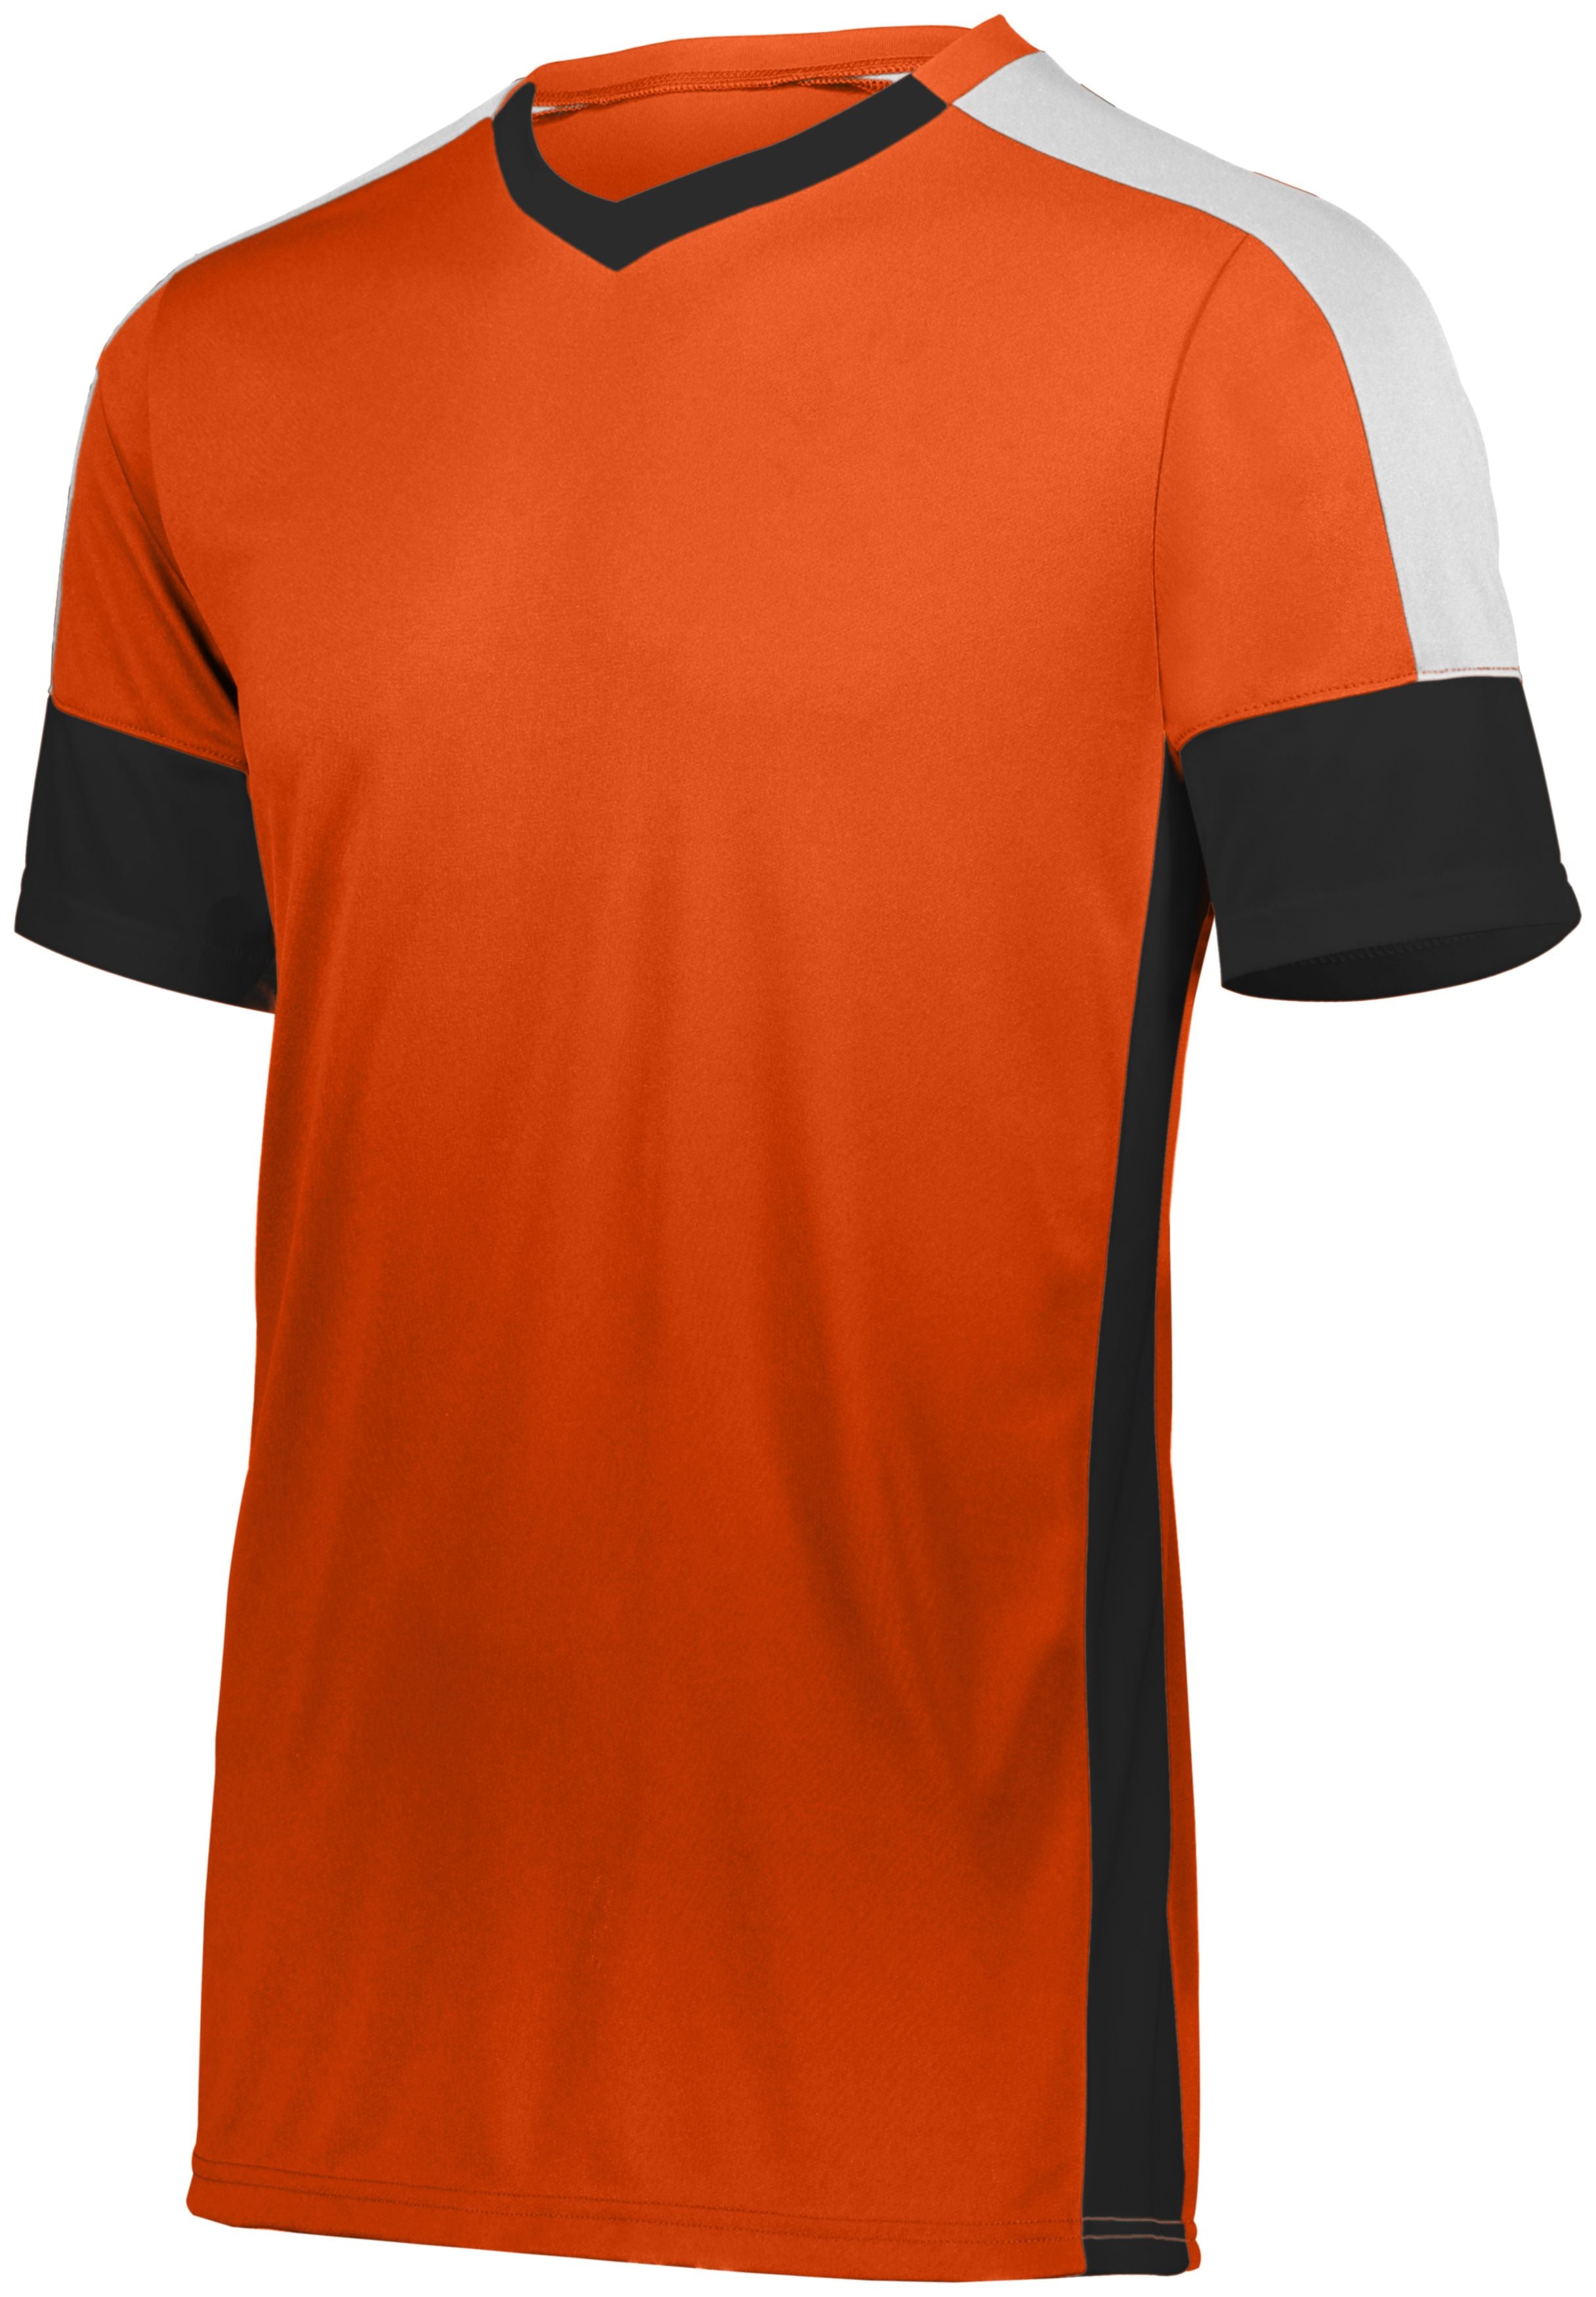 High 5 Youth Wembley Soccer Jersey in Orange/Black/White  -Part of the Youth, Youth-Jersey, High5-Products, Soccer, Shirts, All-Sports-1 product lines at KanaleyCreations.com